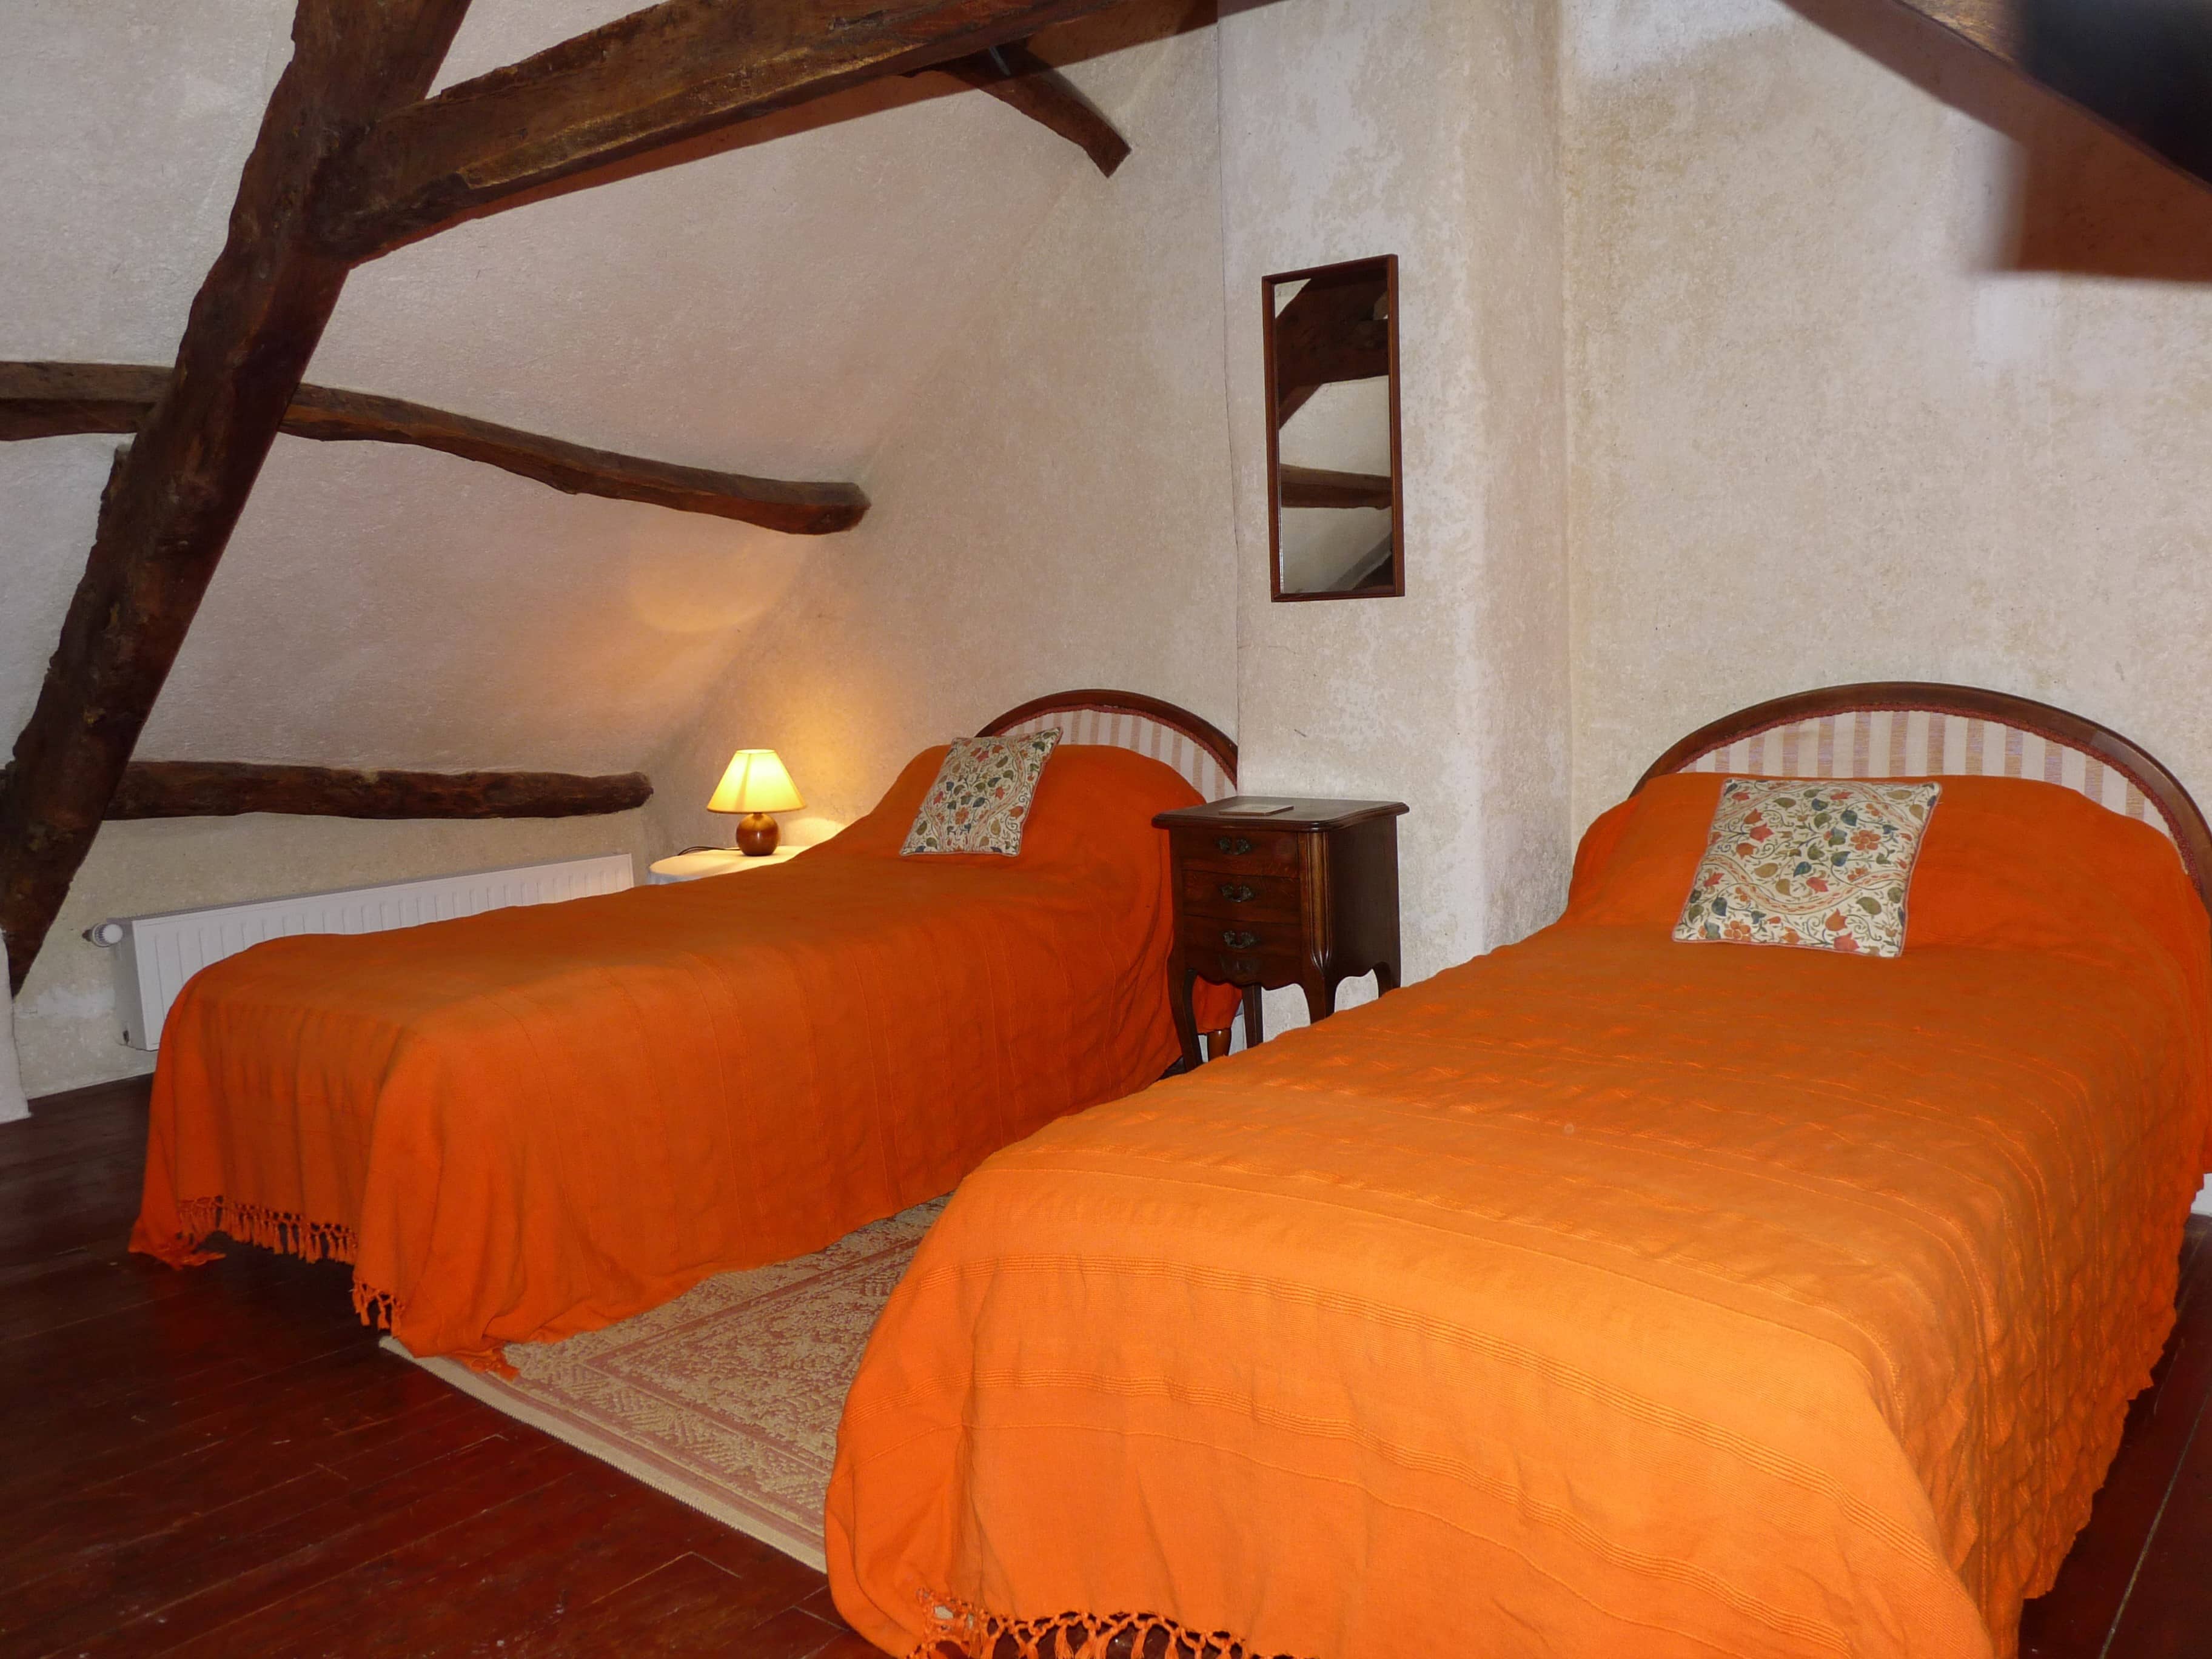 Spacious and comfortable bedroom of La Julerie cottage in Brittany, France, with a king-size bed, elegant rustic decor, a stone fireplace, and a panoramic view of the surrounding countryside. Perfect for a peaceful night's sleep after a day of sightseeing in the Brittany region.